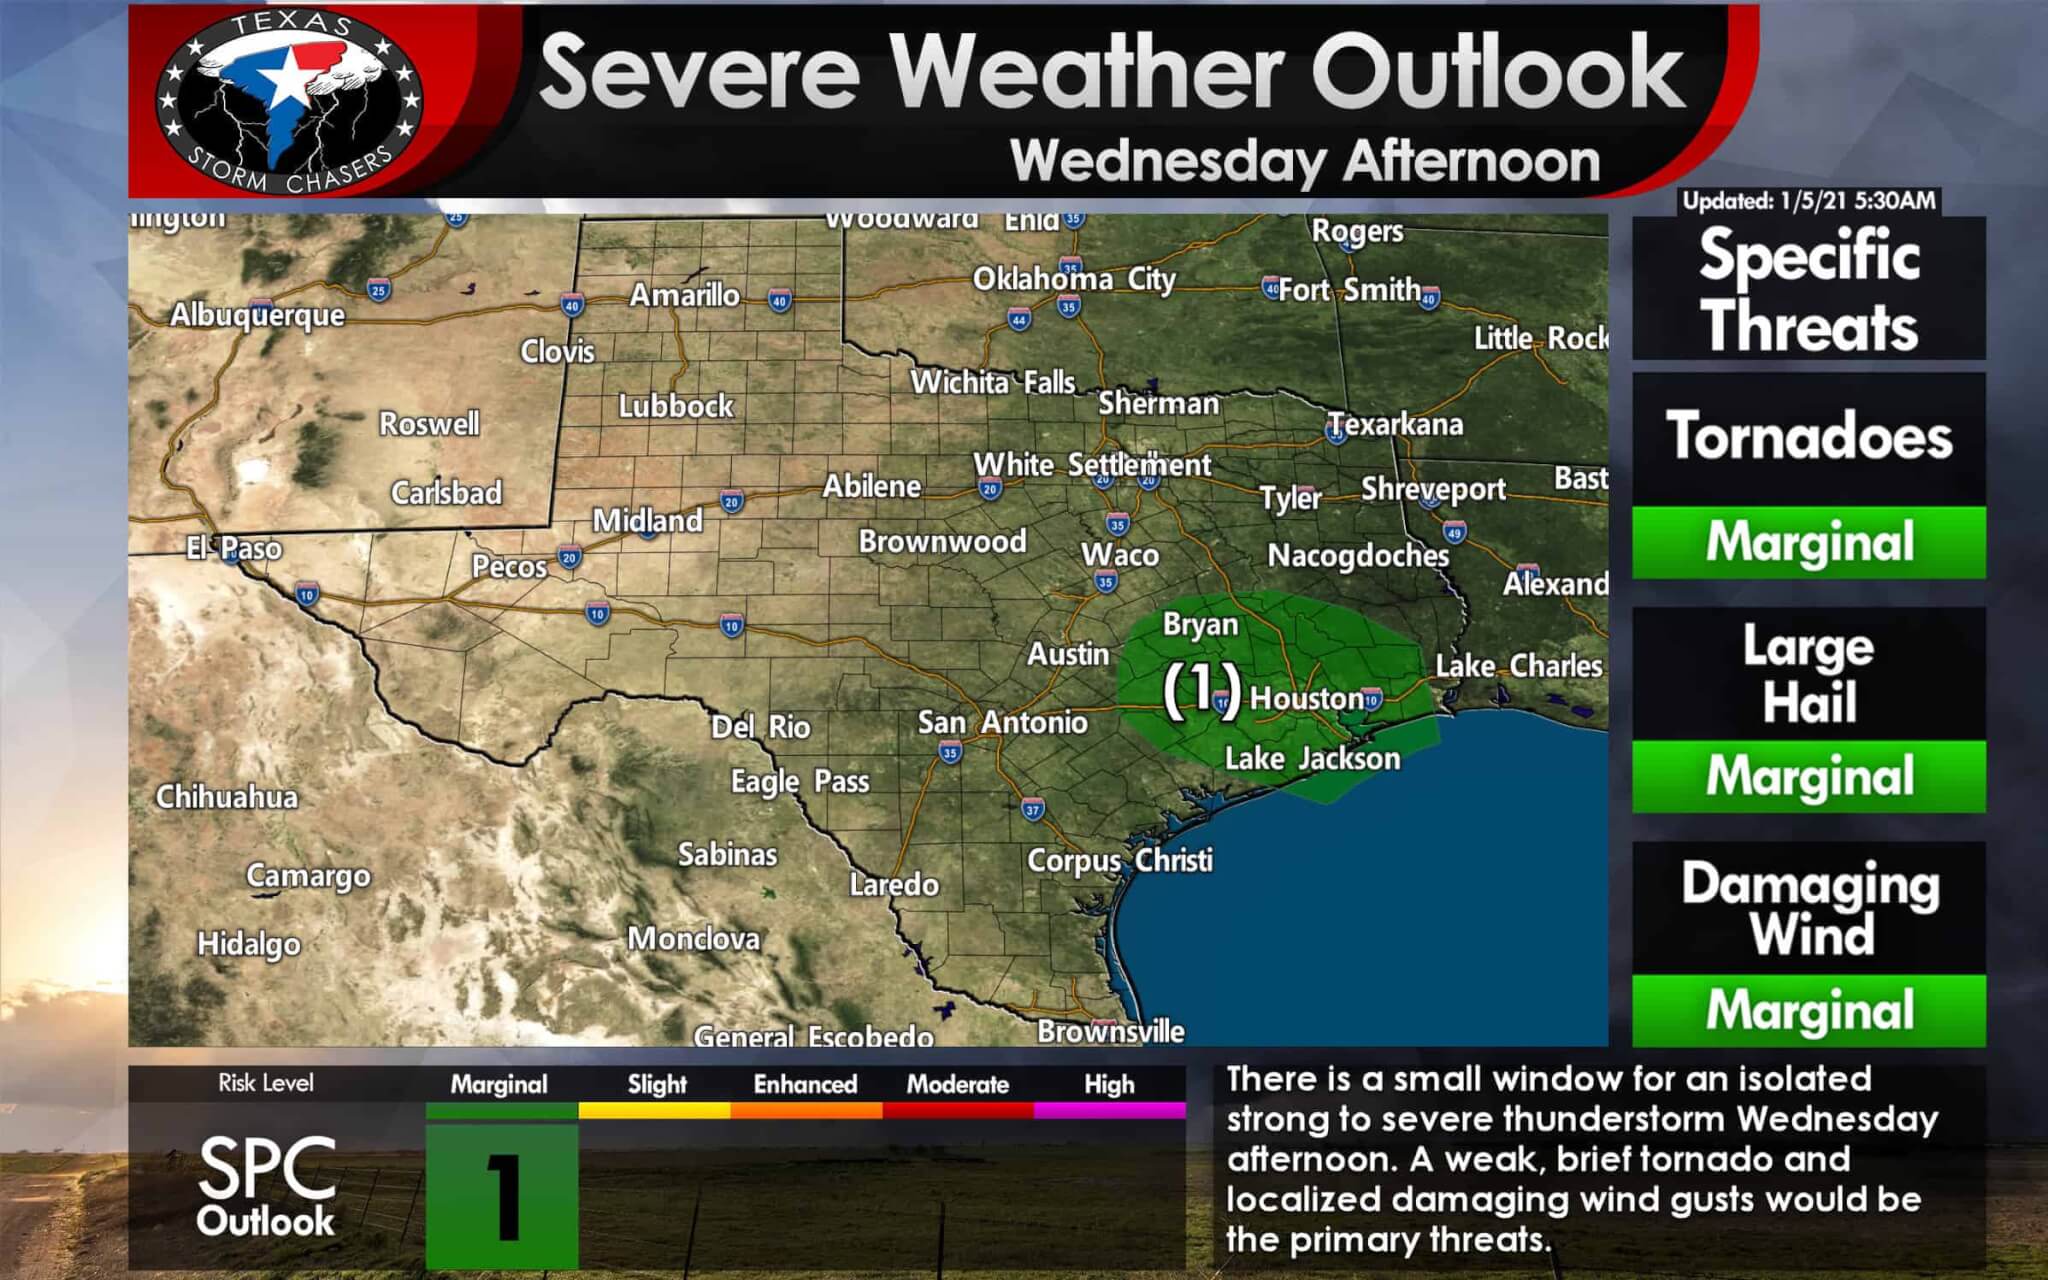 Cold front pushes through tomorrow; Rain likely in eastern third of Texas